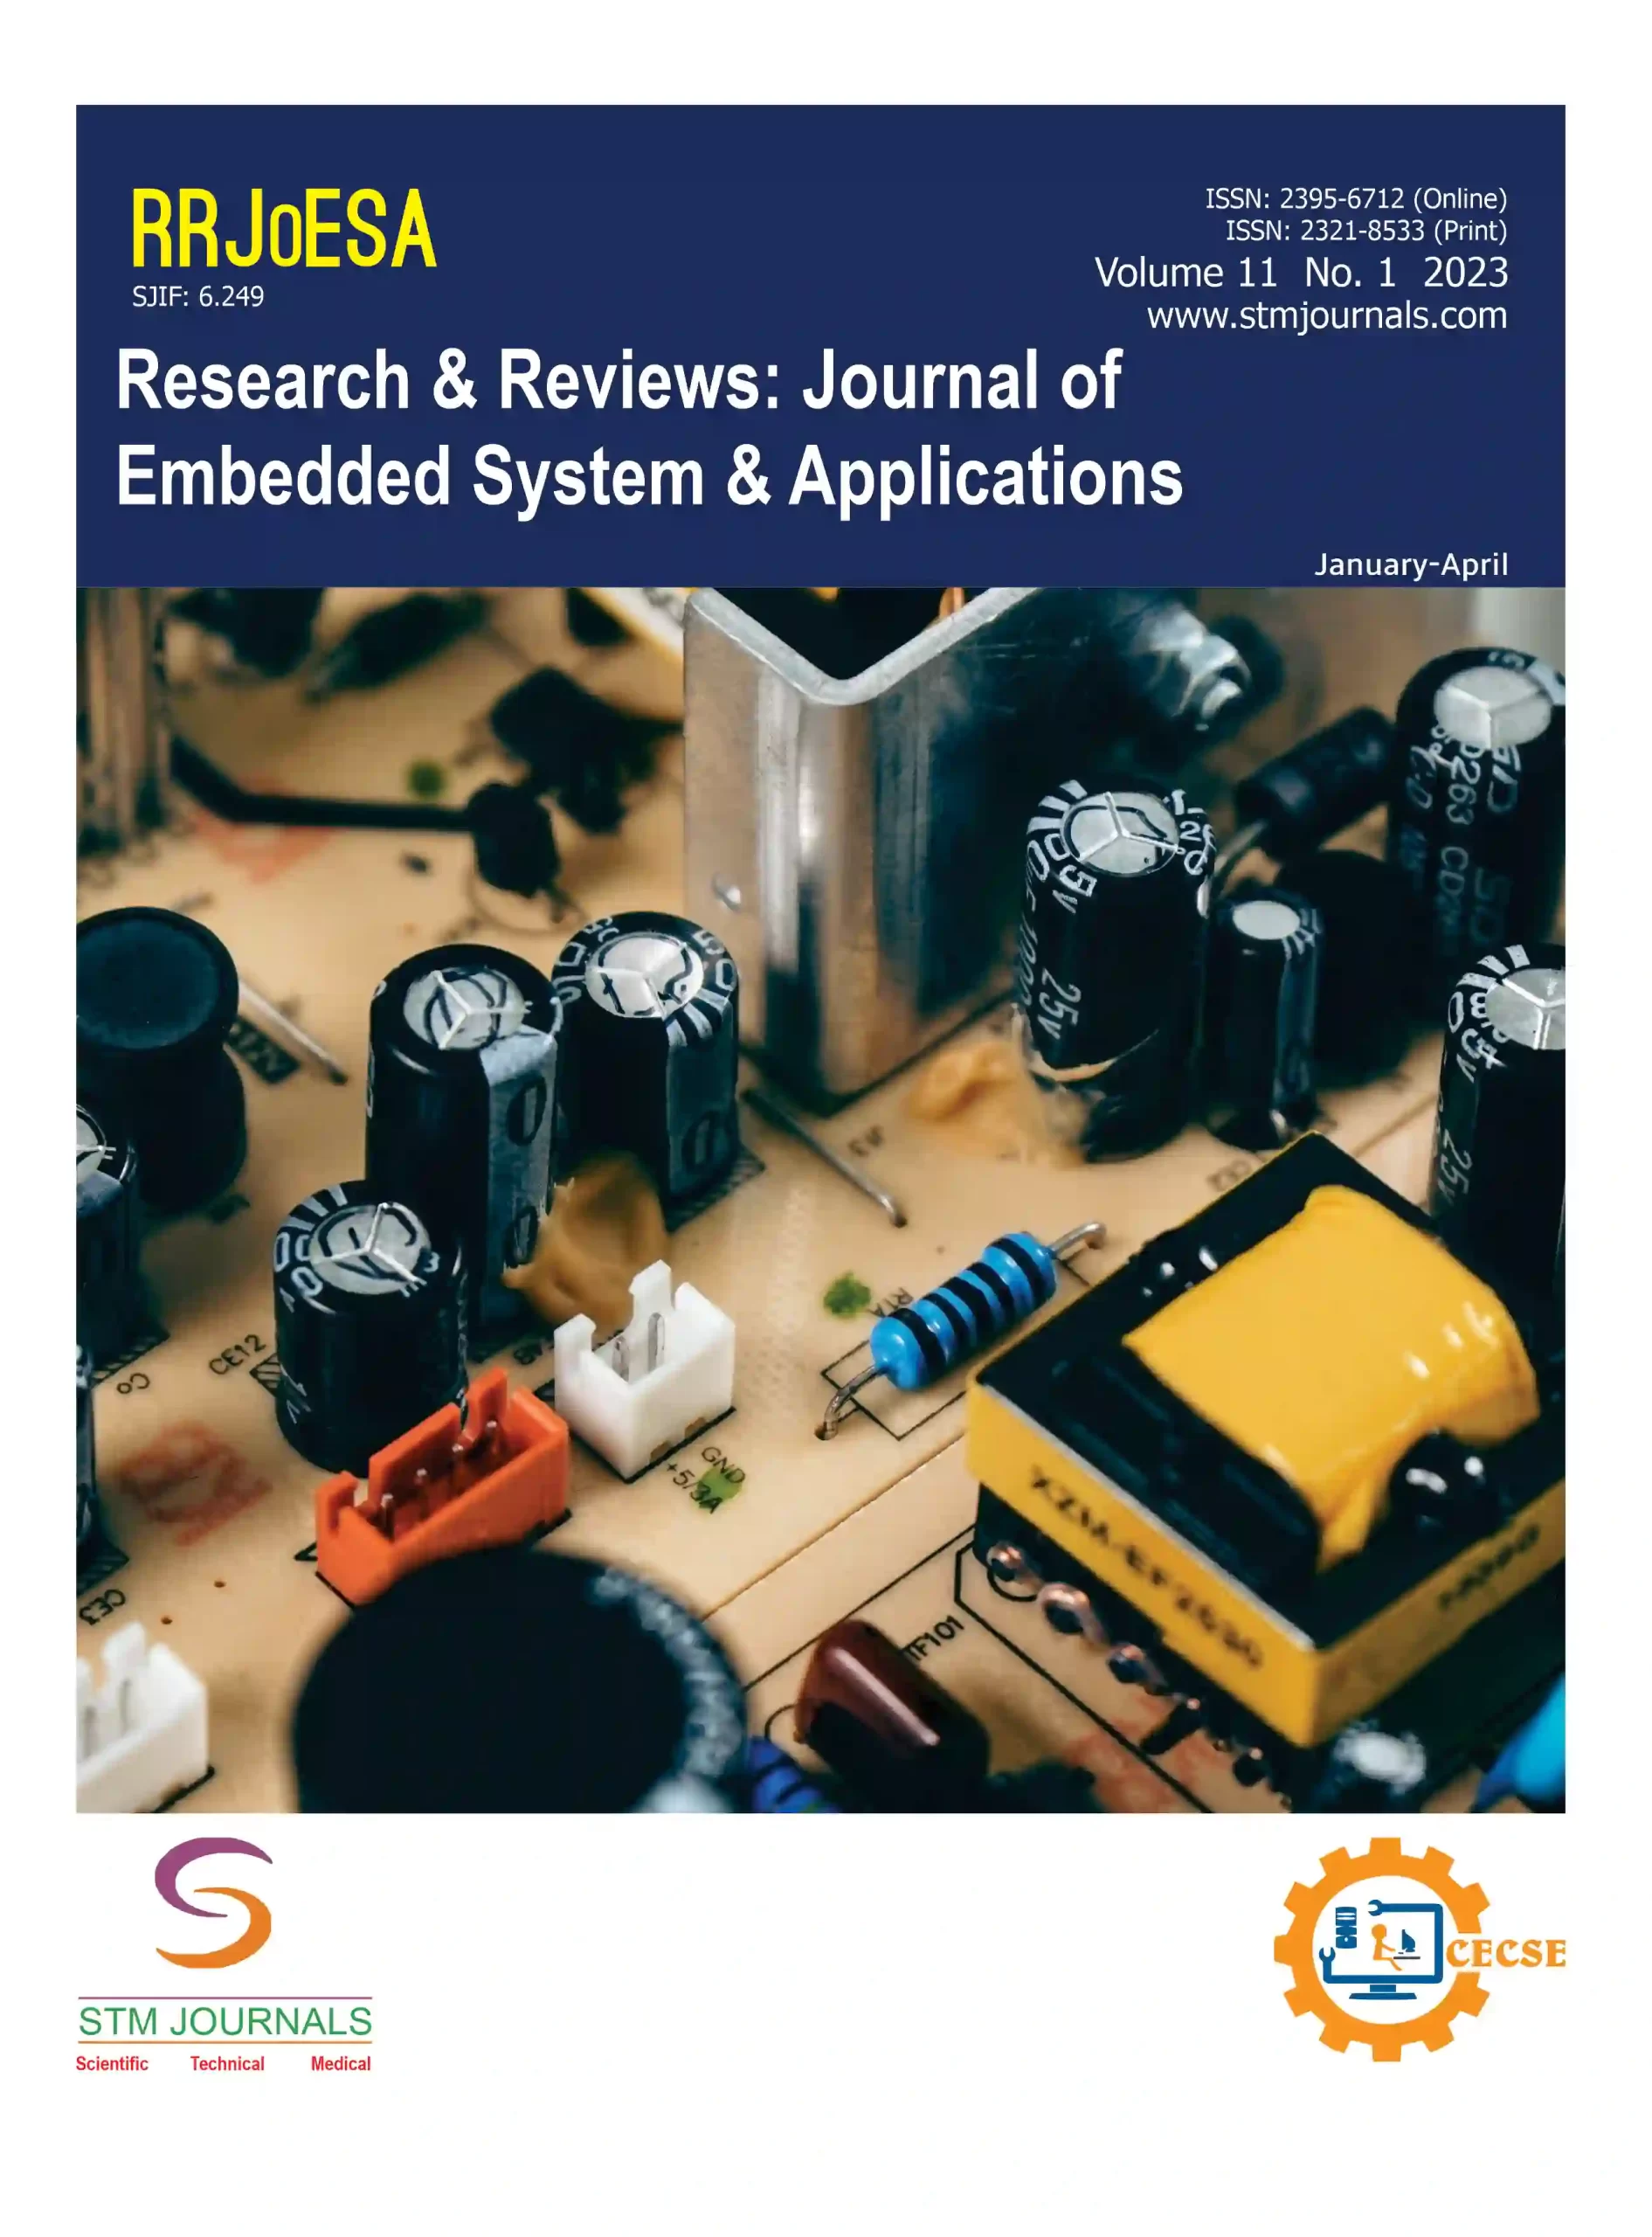 Research & Reviews: A Journal of Embedded System & Applications Cover